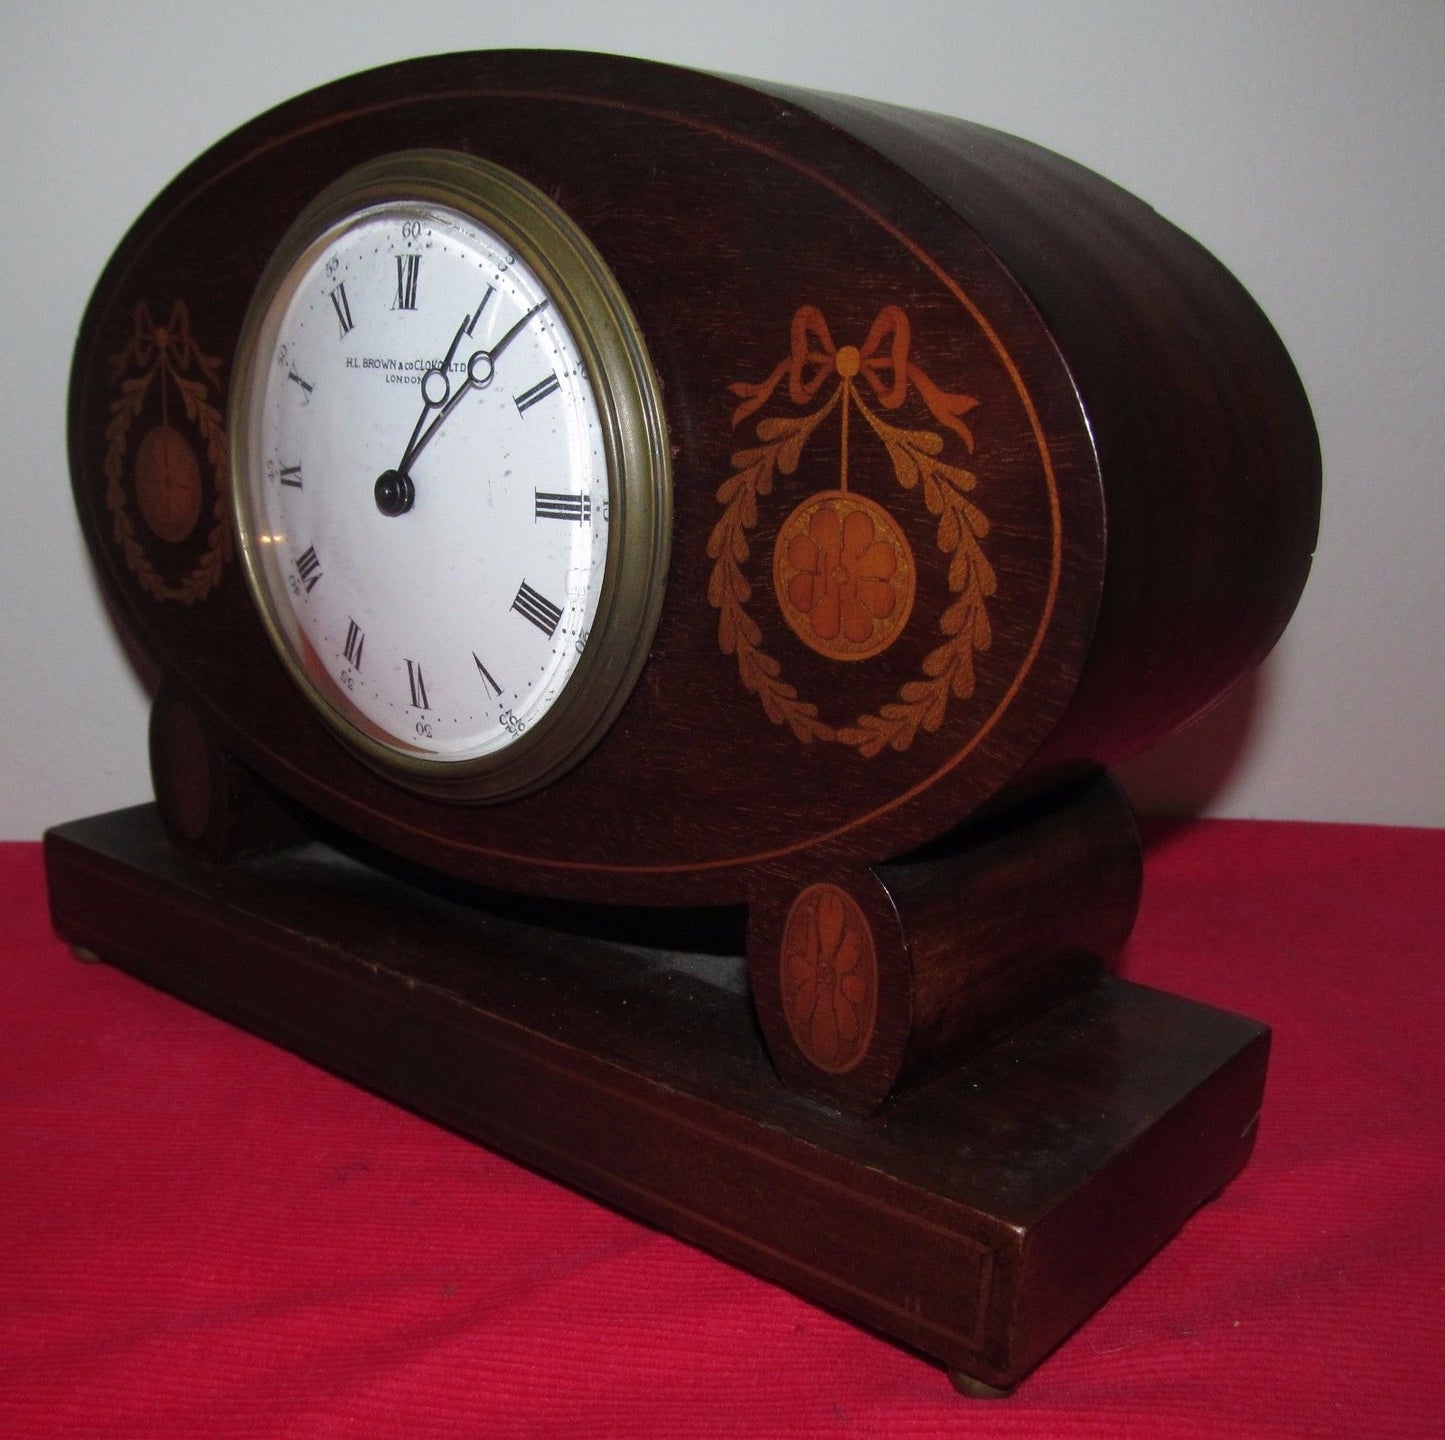 FINELY INLAID ANTIQUE EDWARDIAN MAHOGANY DESK CLOCK BY H. L. BROWN ENGLAND